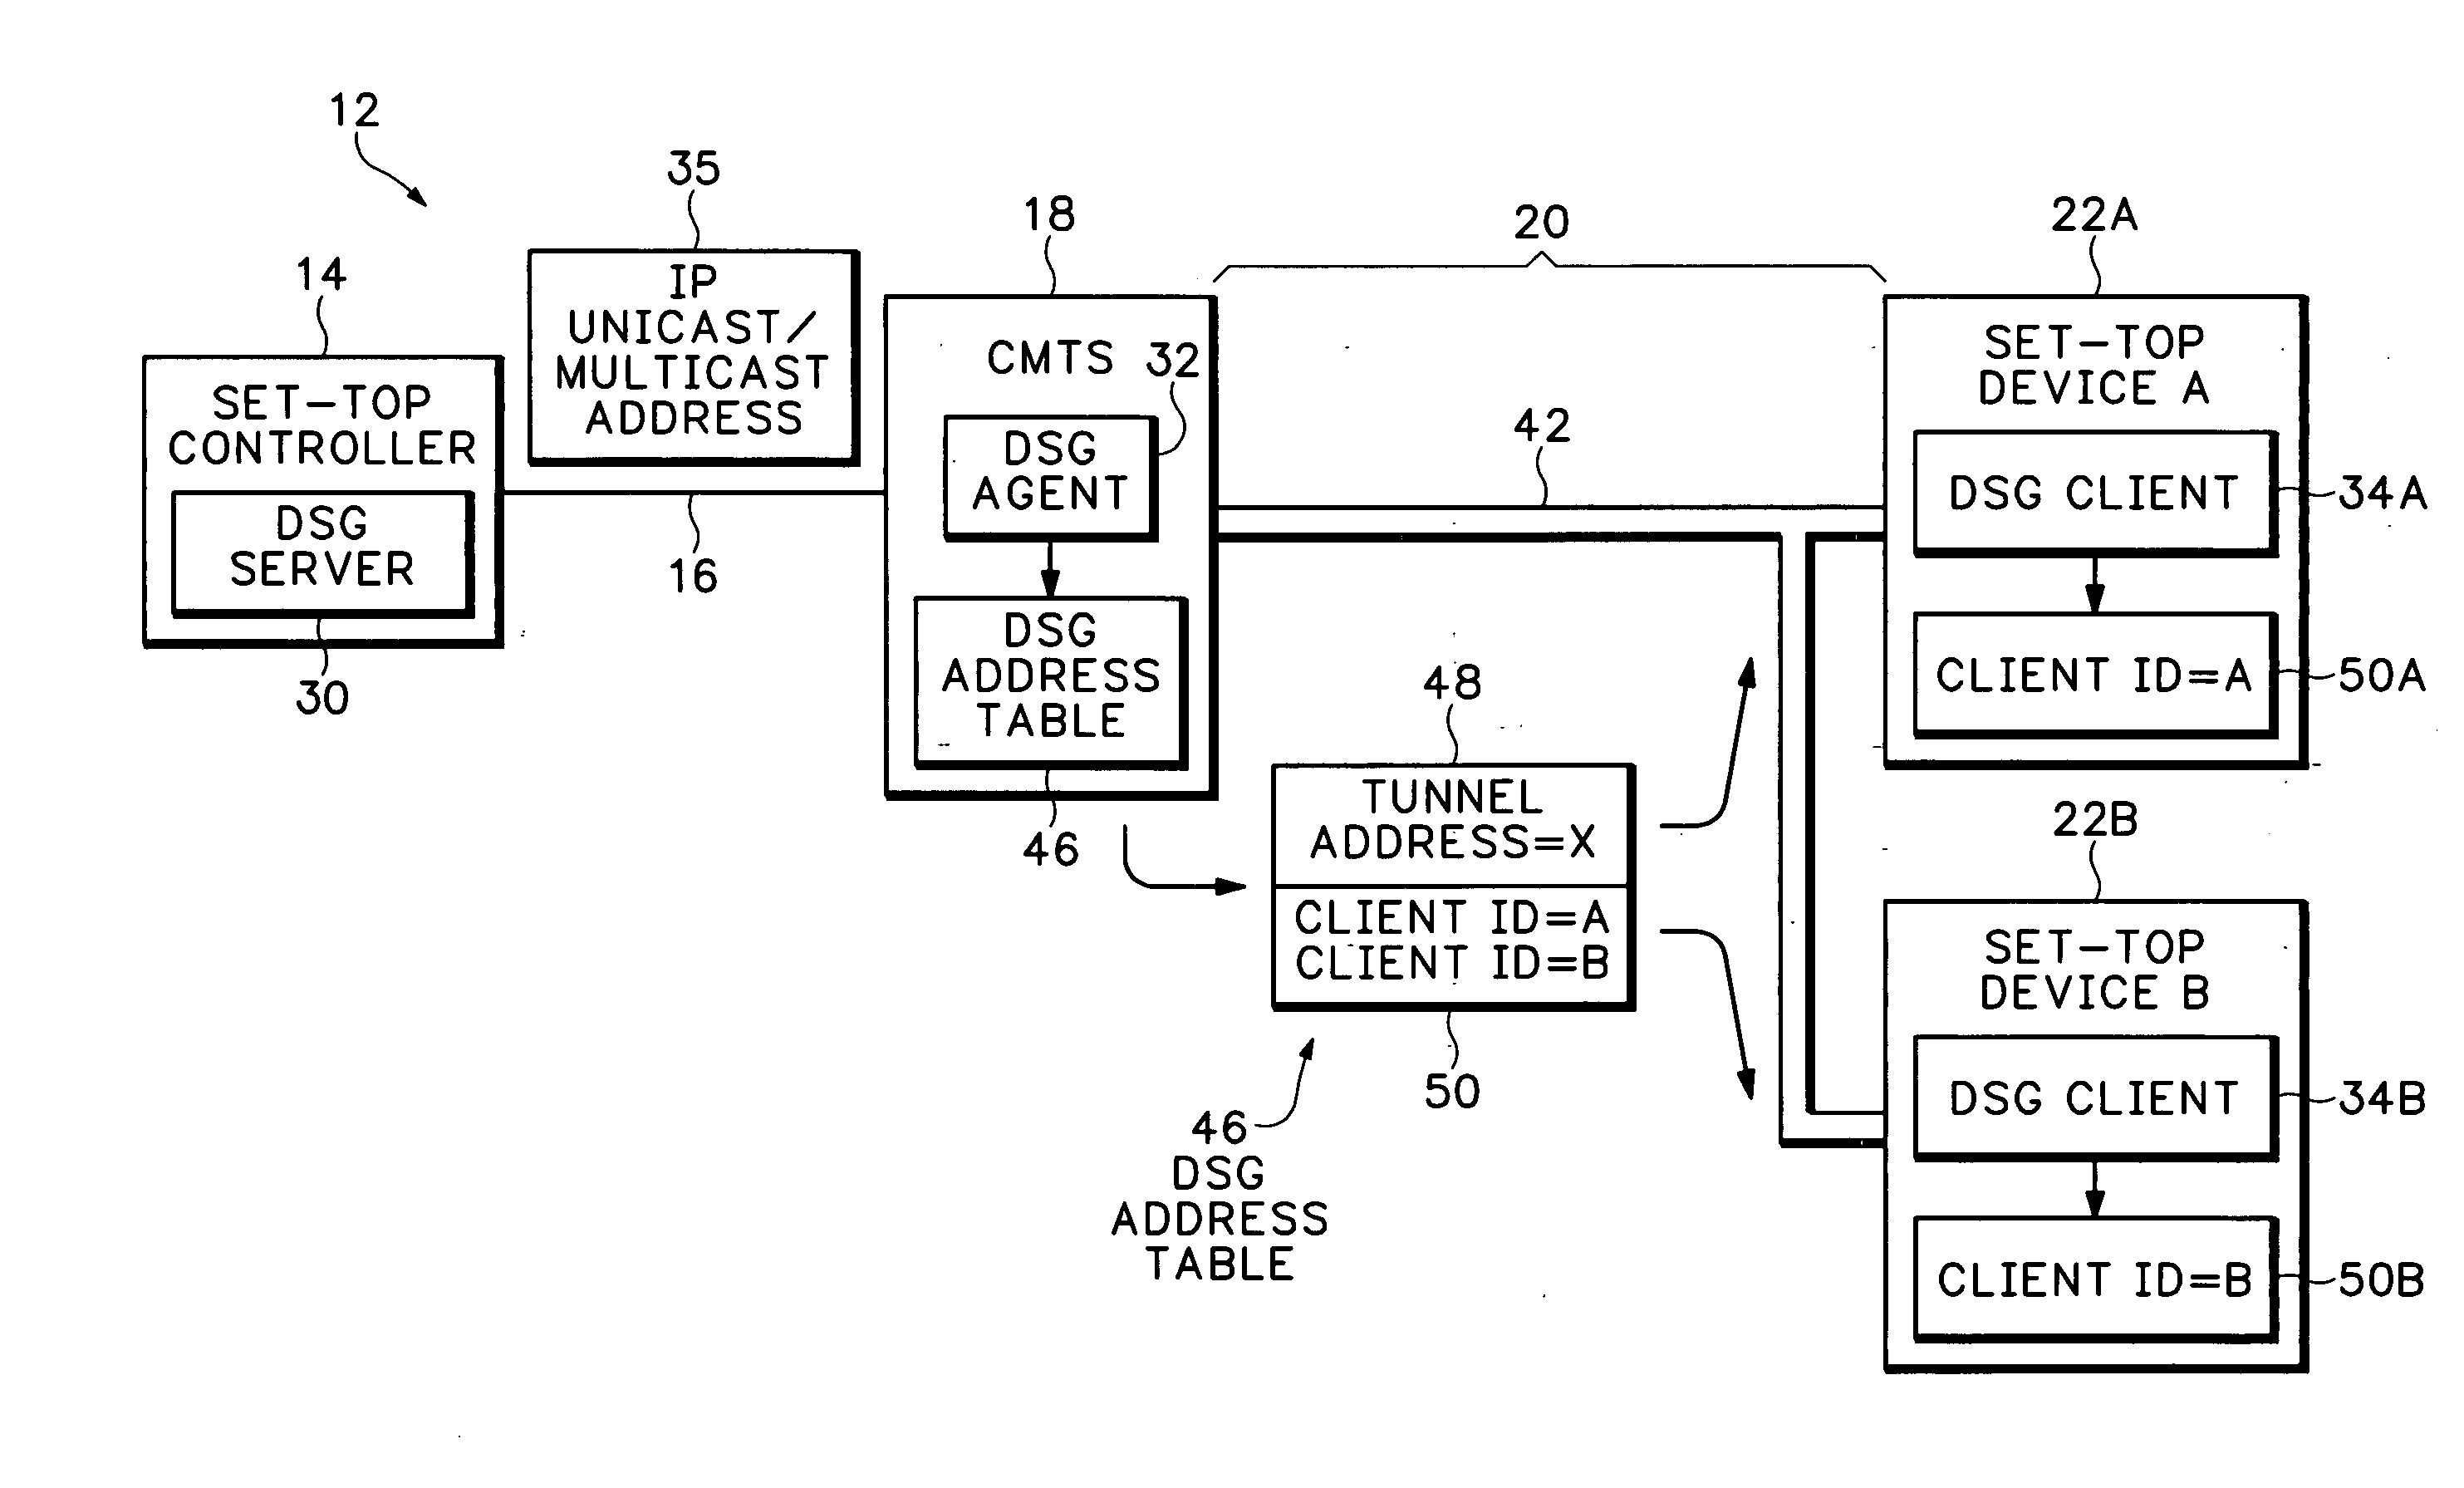 Tunneling scheme for transporting information over a cable network